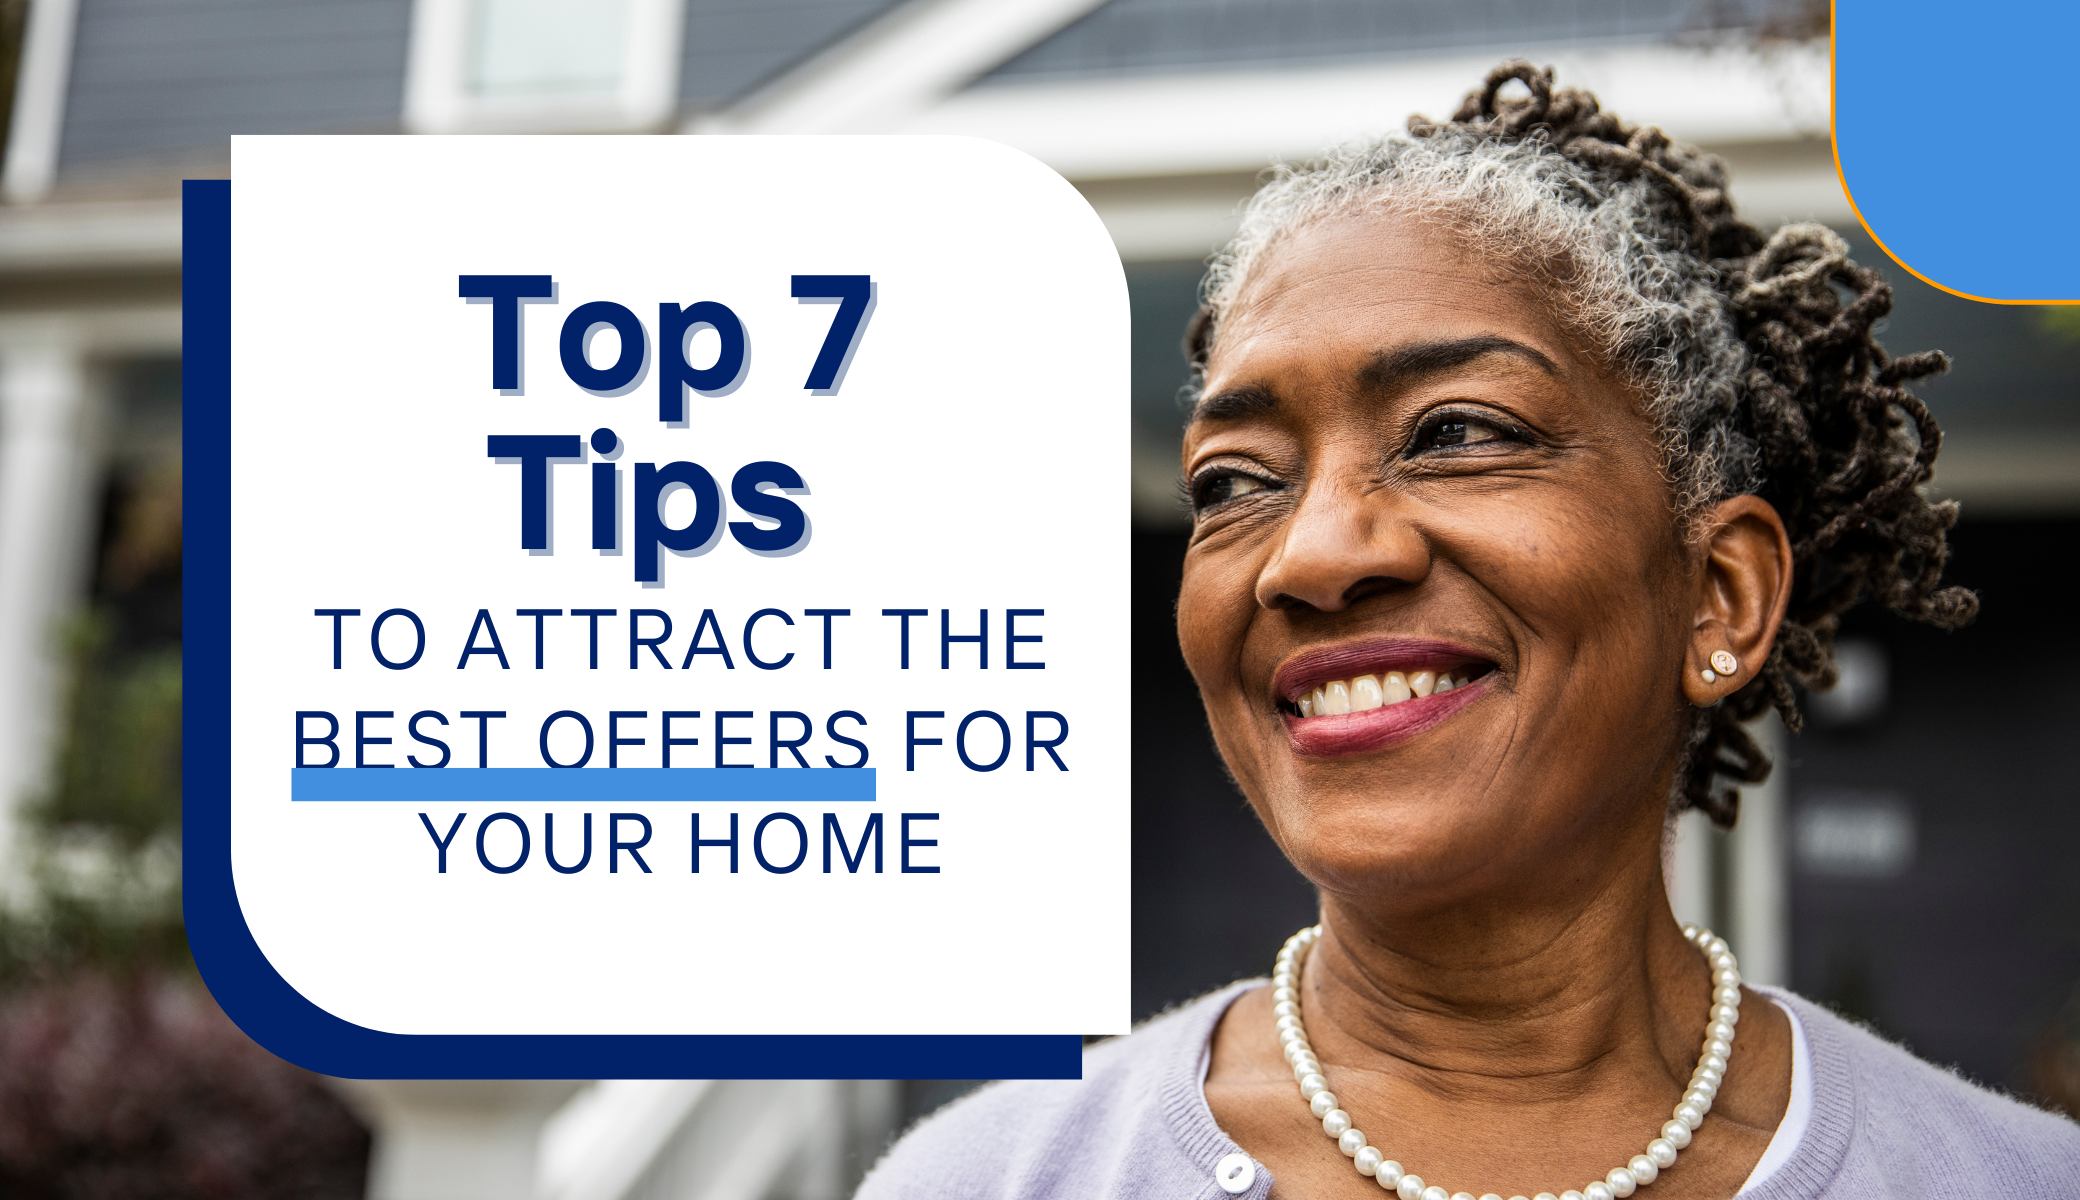 Top 7 Tips To Attract the Best Offers for Your Home